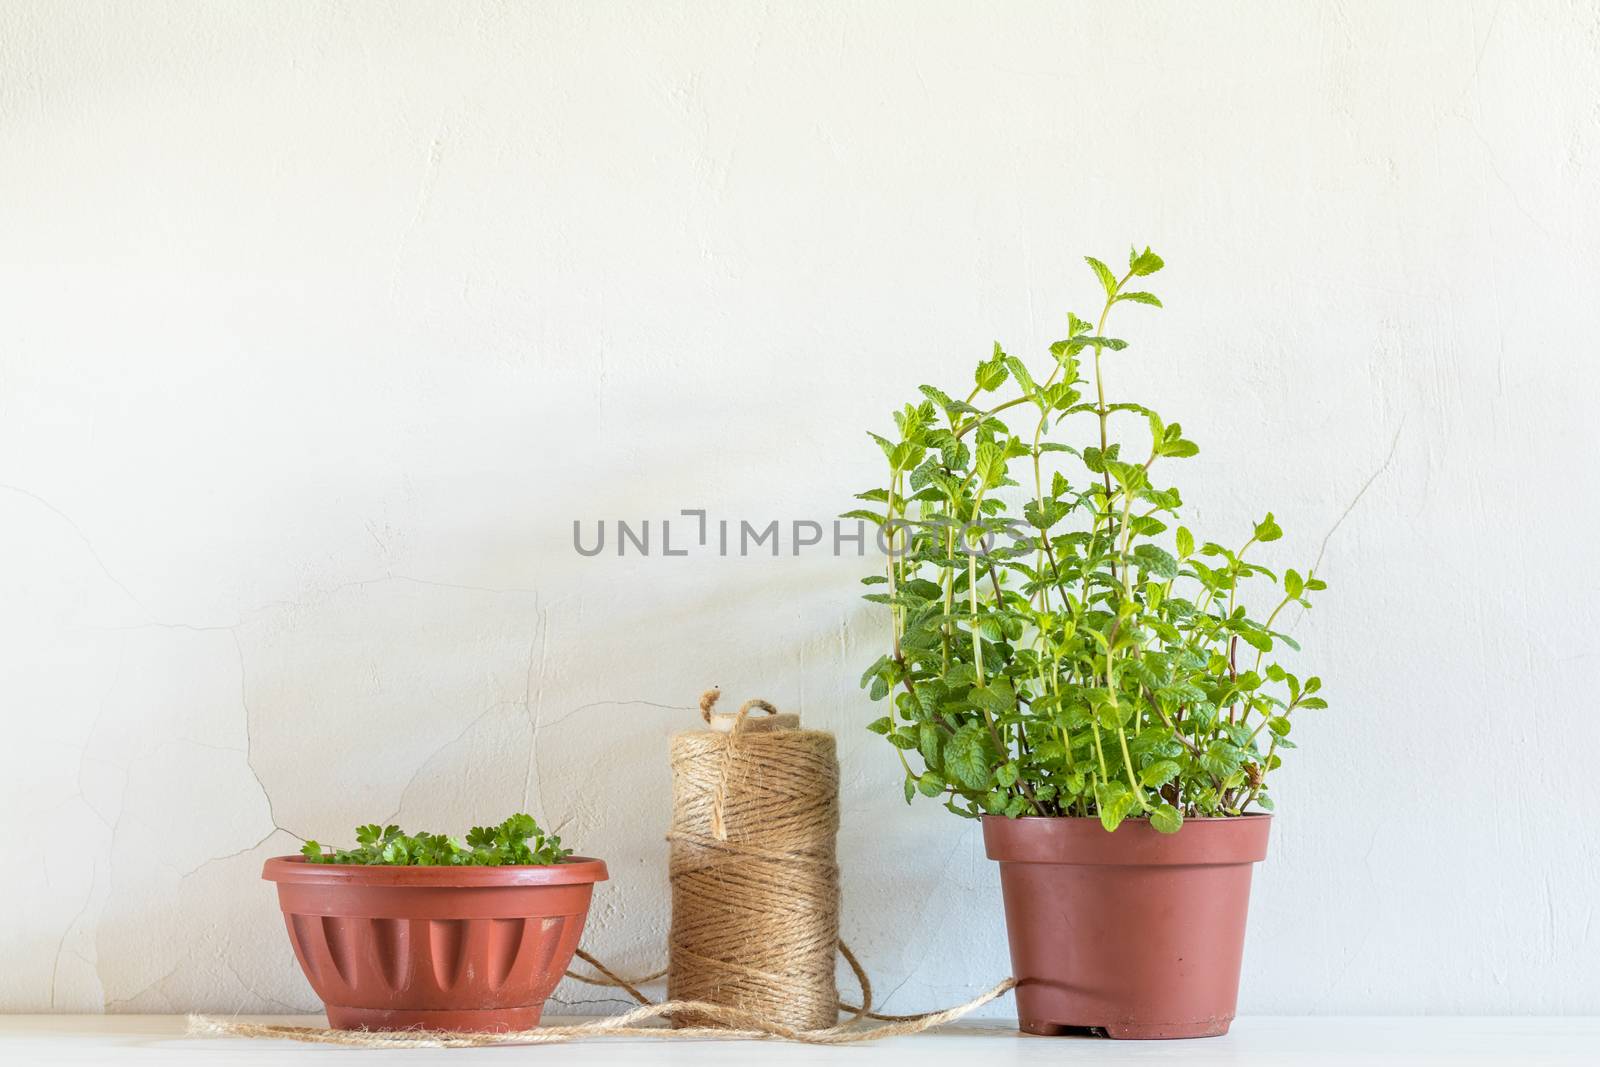 Spring gardening light concept. Fresh mint, parsley in pots, hank of rope on a white table. White wall background.